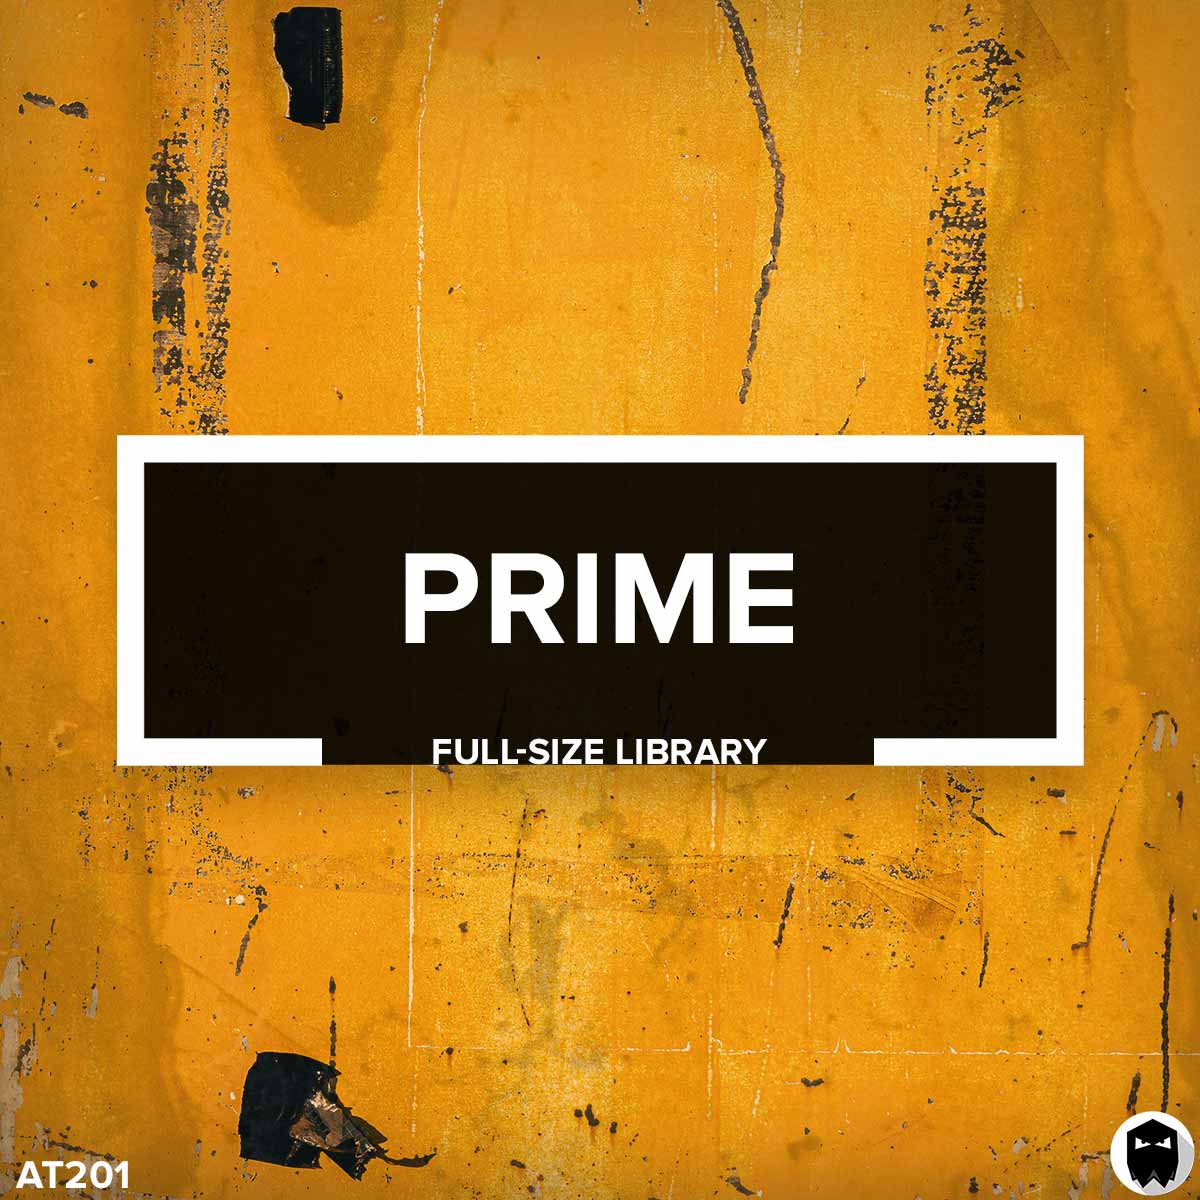 Prime // Full-Size Library